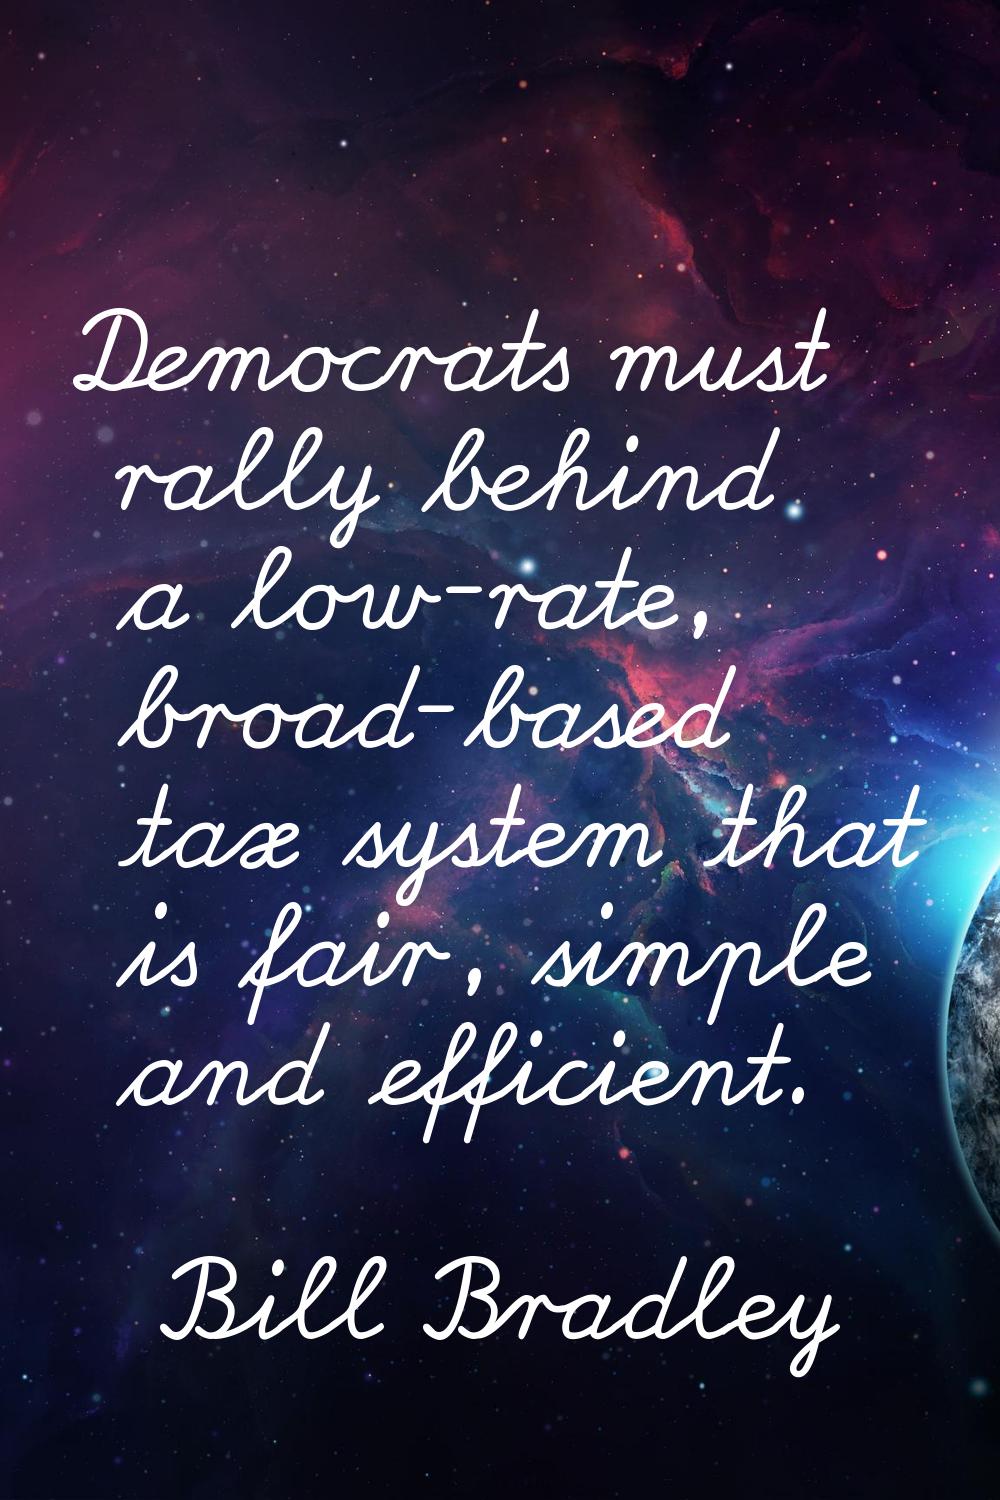 Democrats must rally behind a low-rate, broad-based tax system that is fair, simple and efficient.